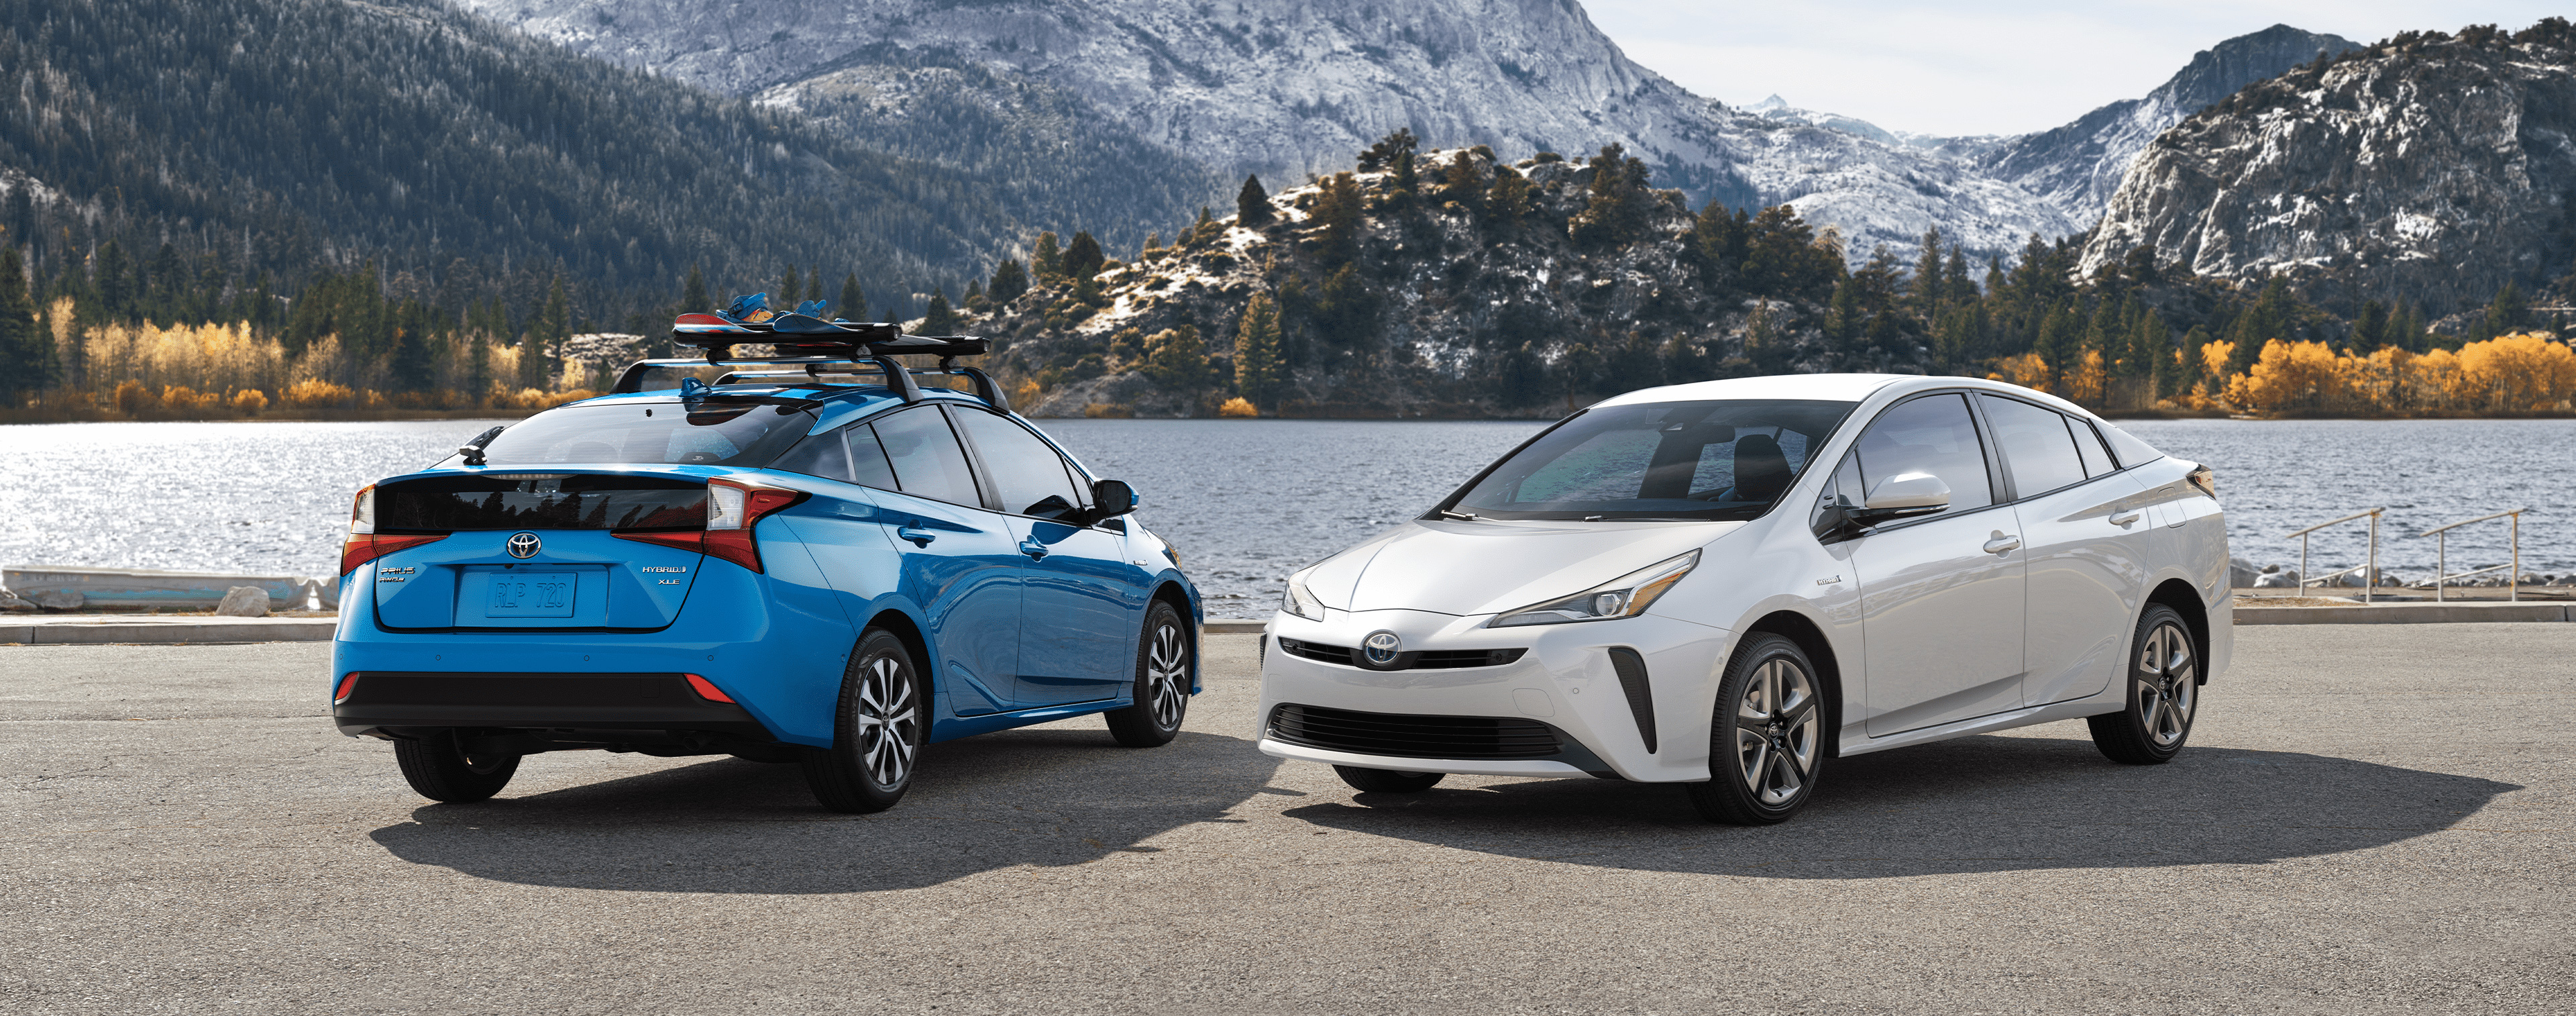 2020 Toyota Prius Appearance Main Img